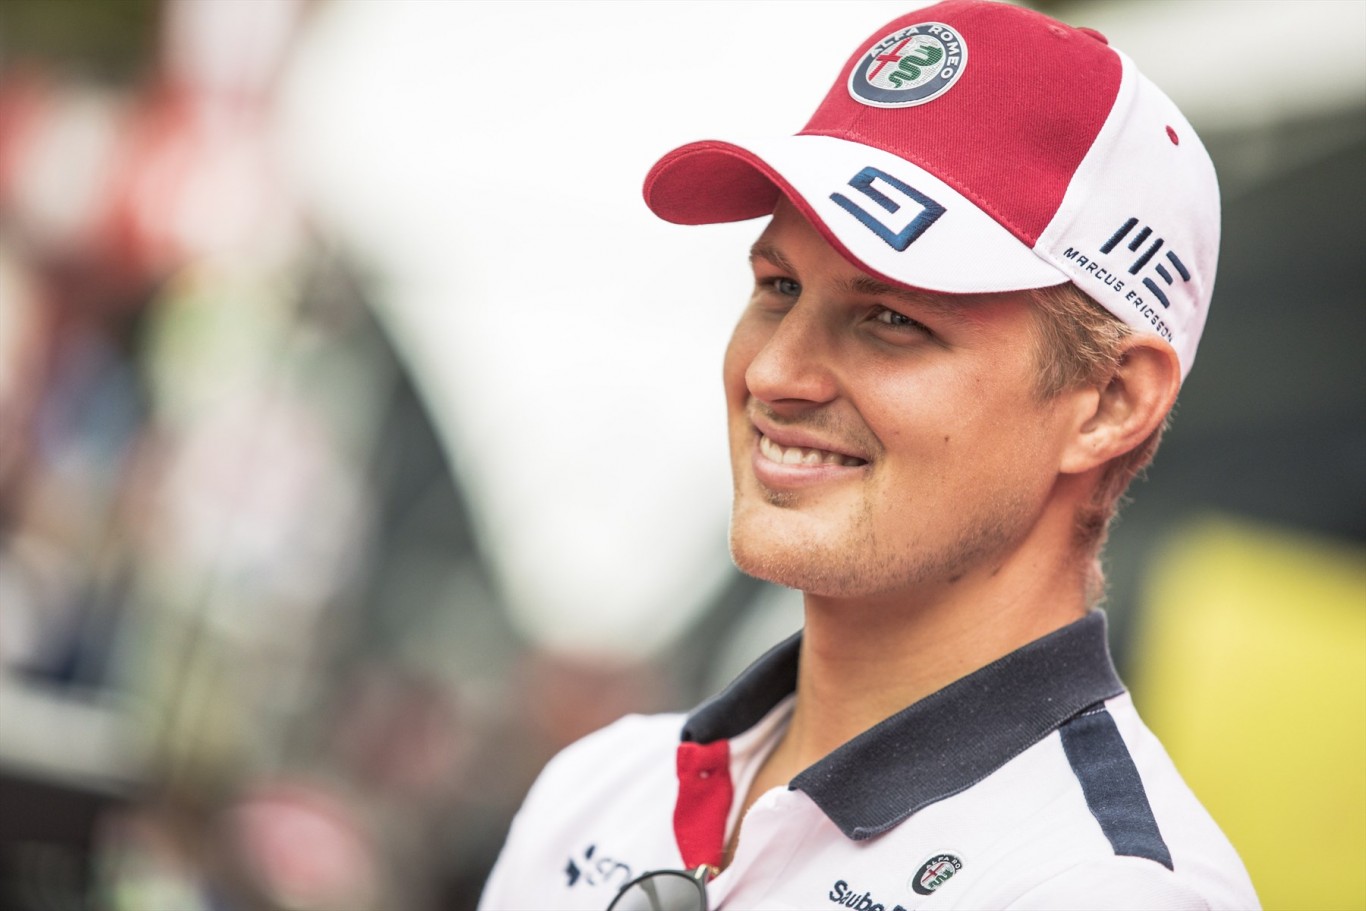 Marcus Ericsson to take on the role of Third Driver and Brand Ambassador for the Alfa Romeo Sauber F1 Team from 2019